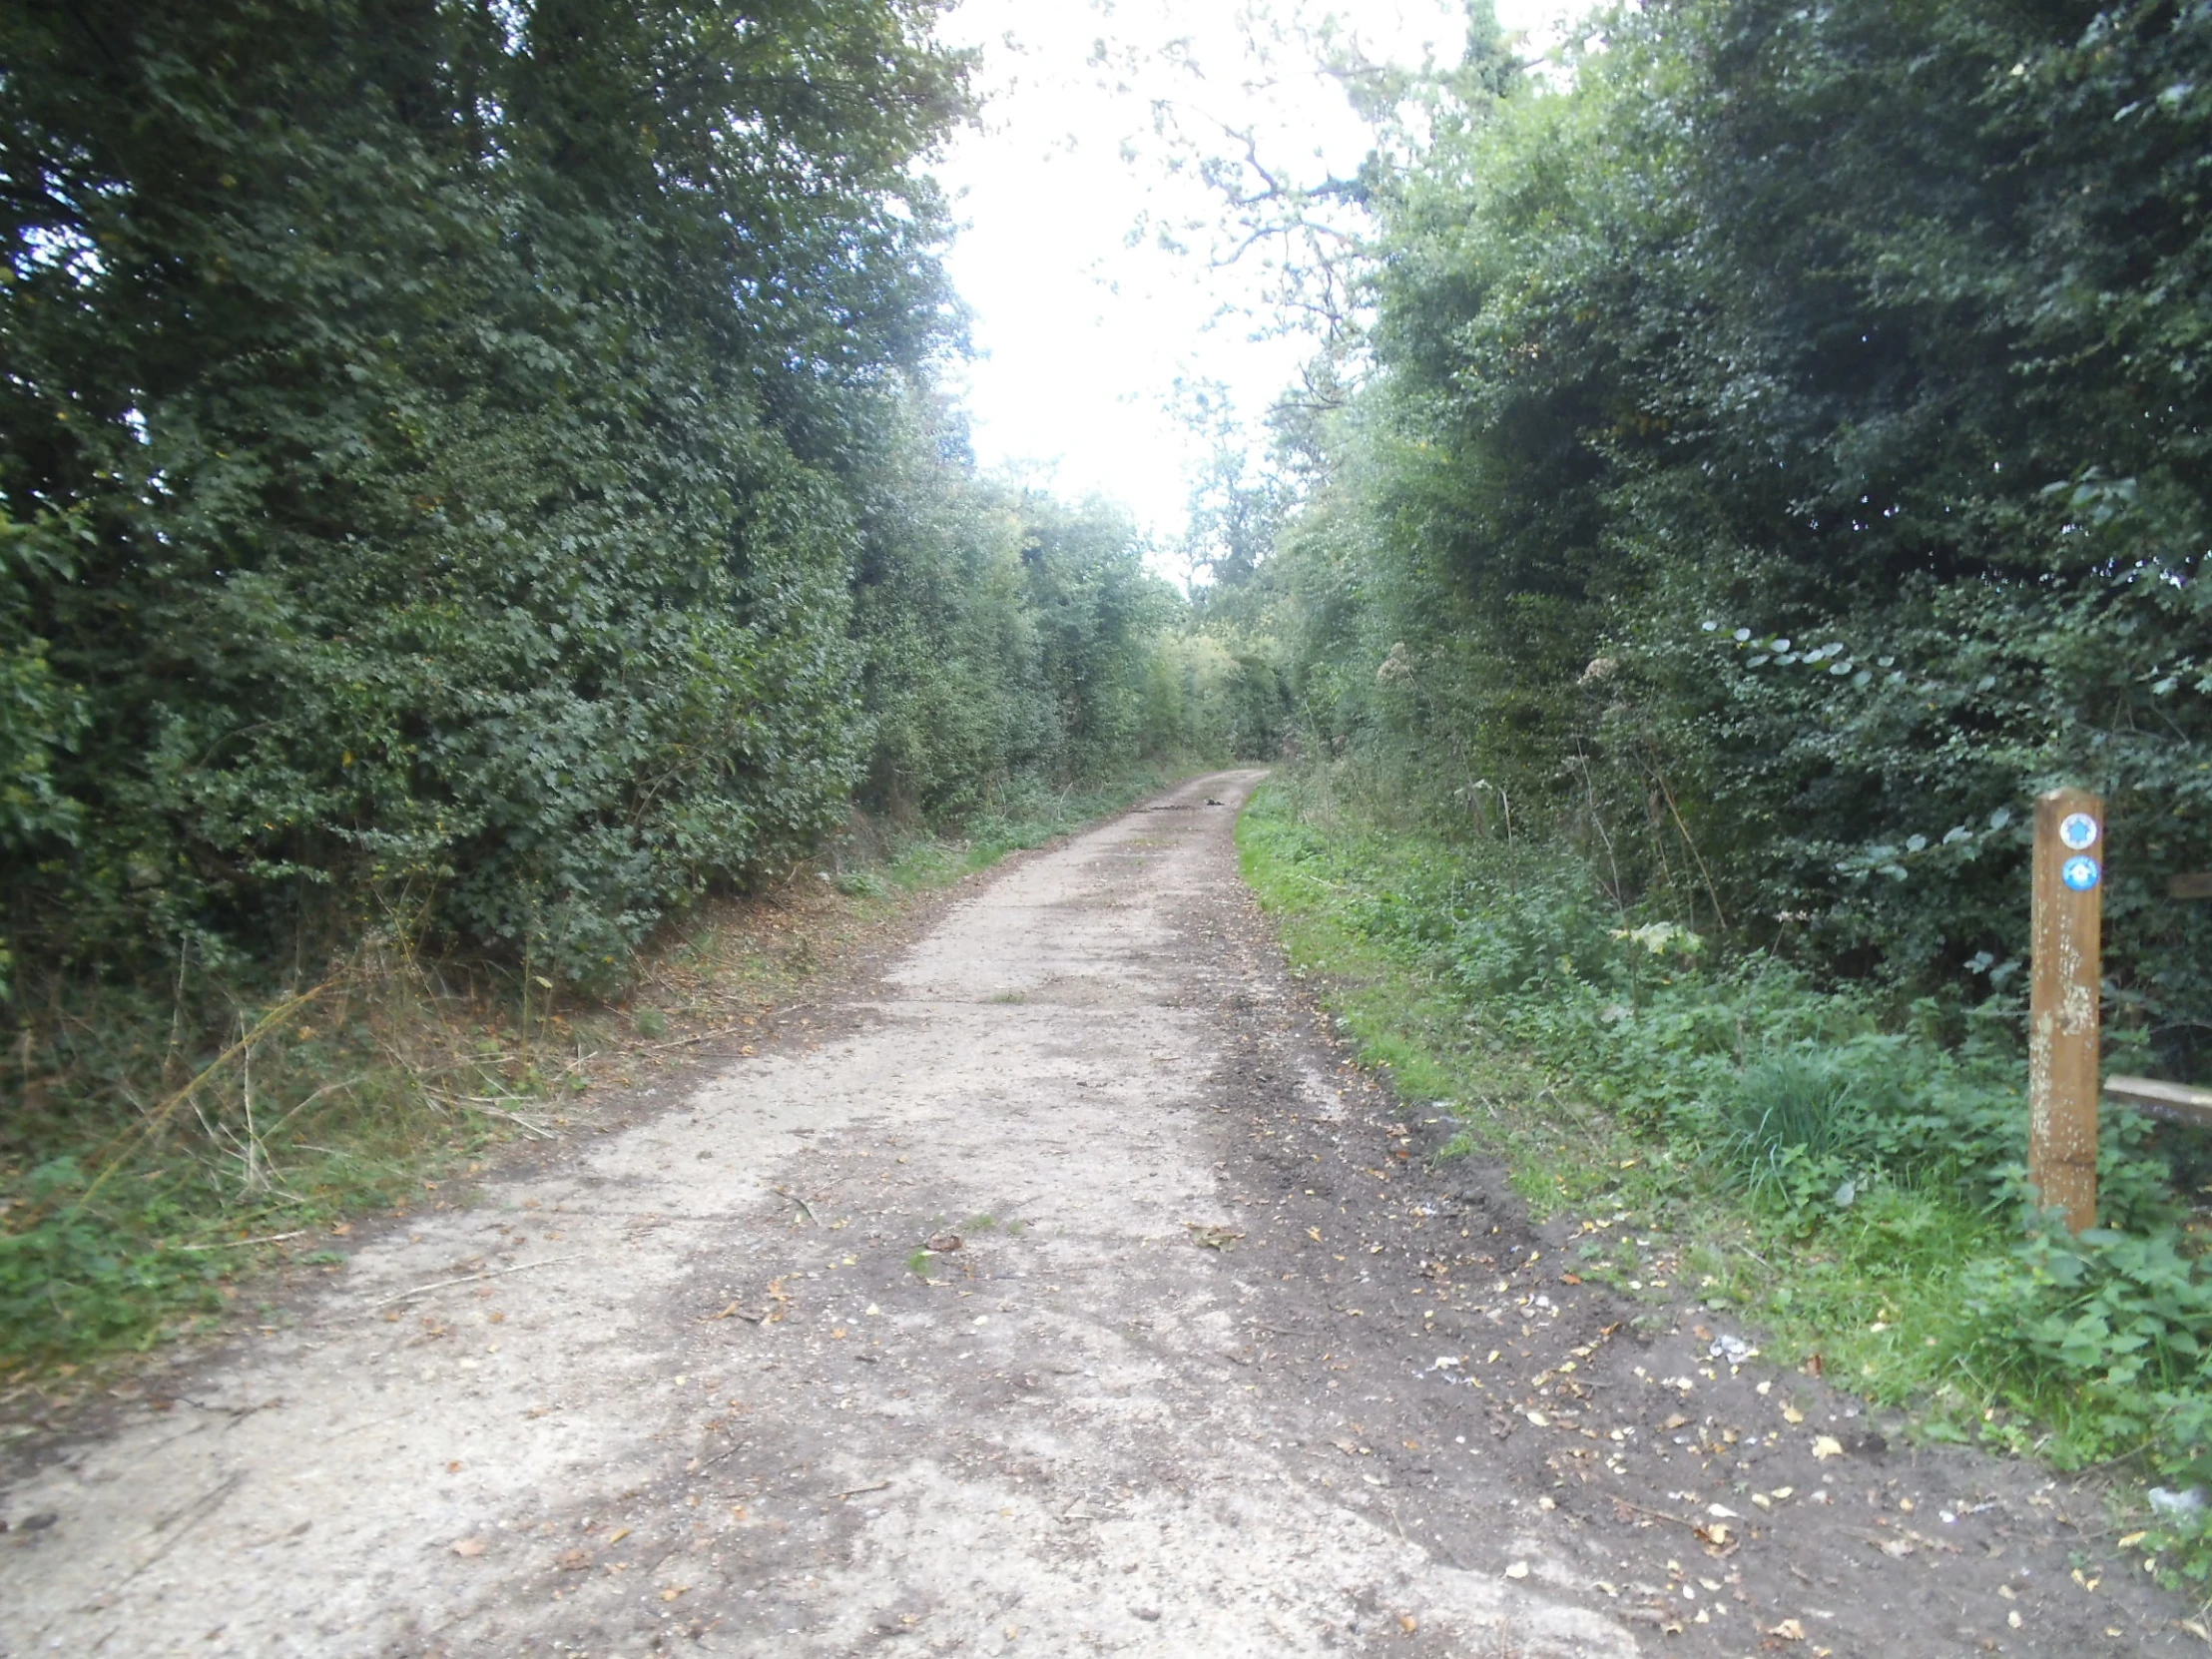 a dirt road surrounded by trees with a light pole